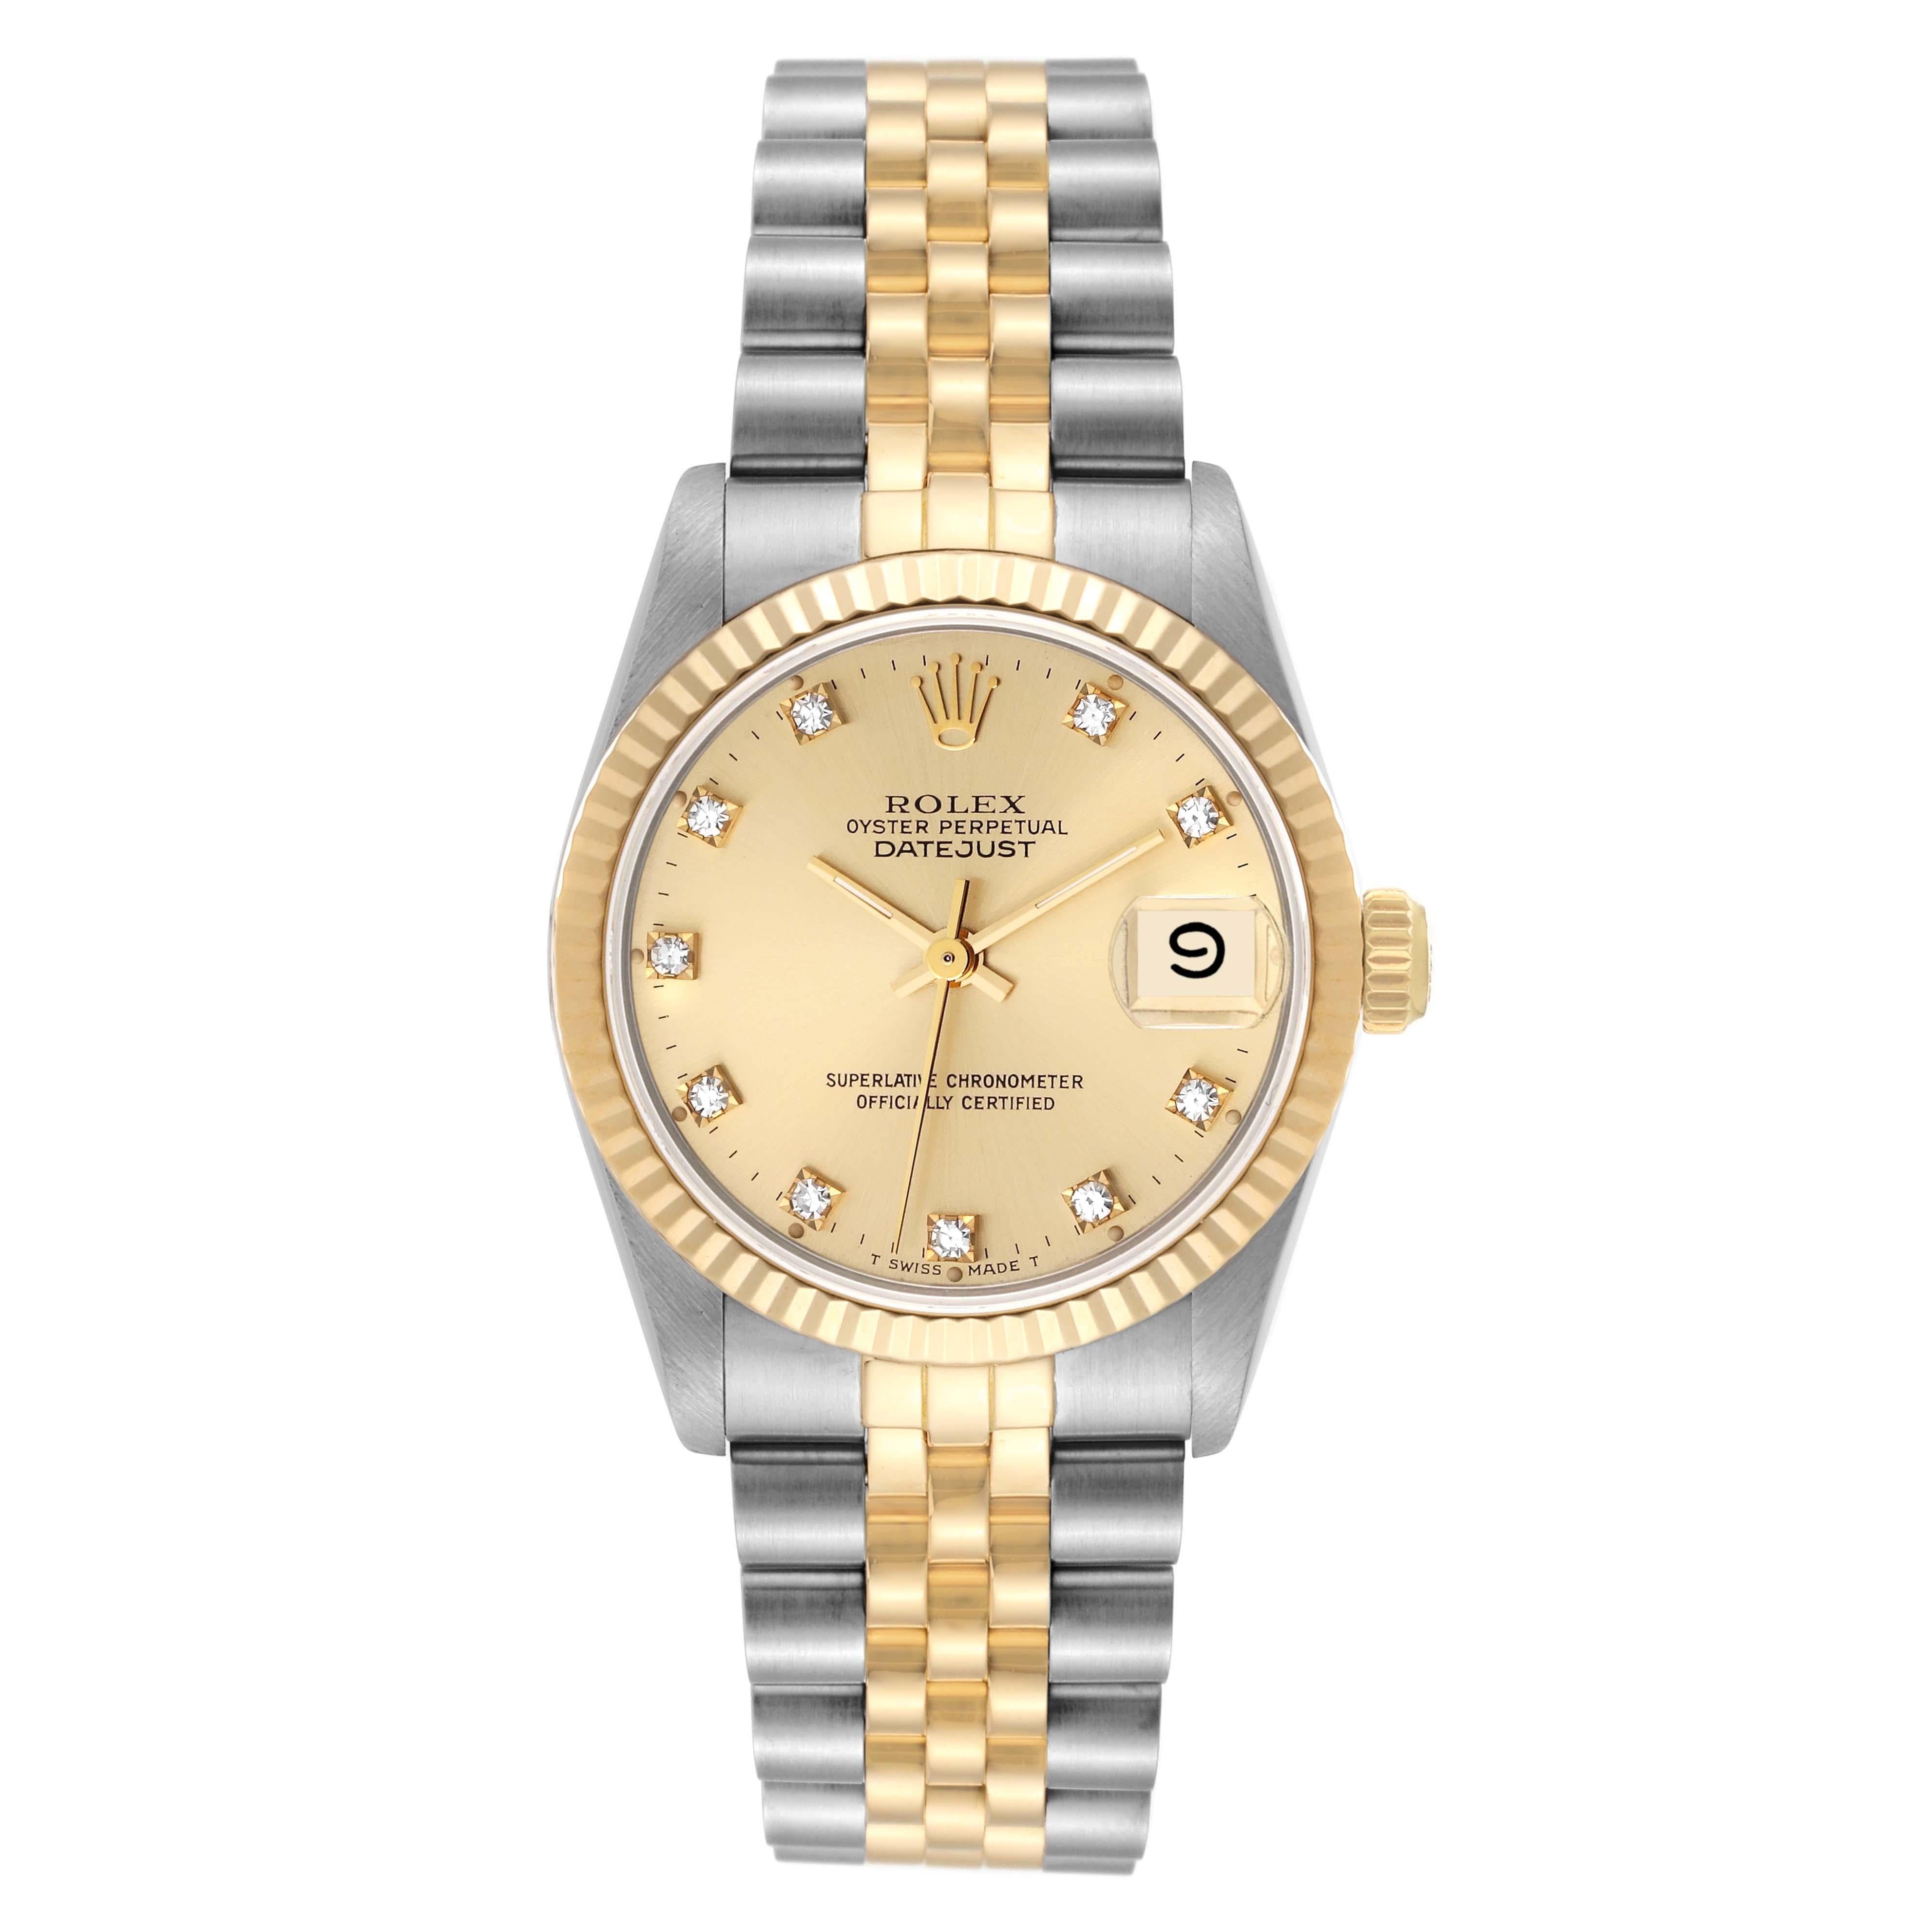 Rolex Datejust Midsize Diamond Dial Steel Yellow Gold Ladies Watch 68273. Officially certified chronometer automatic self-winding movement. Stainless steel oyster case 31 mm in diameter. Rolex logo on an 18K yellow gold crown. 18k yellow gold fluted